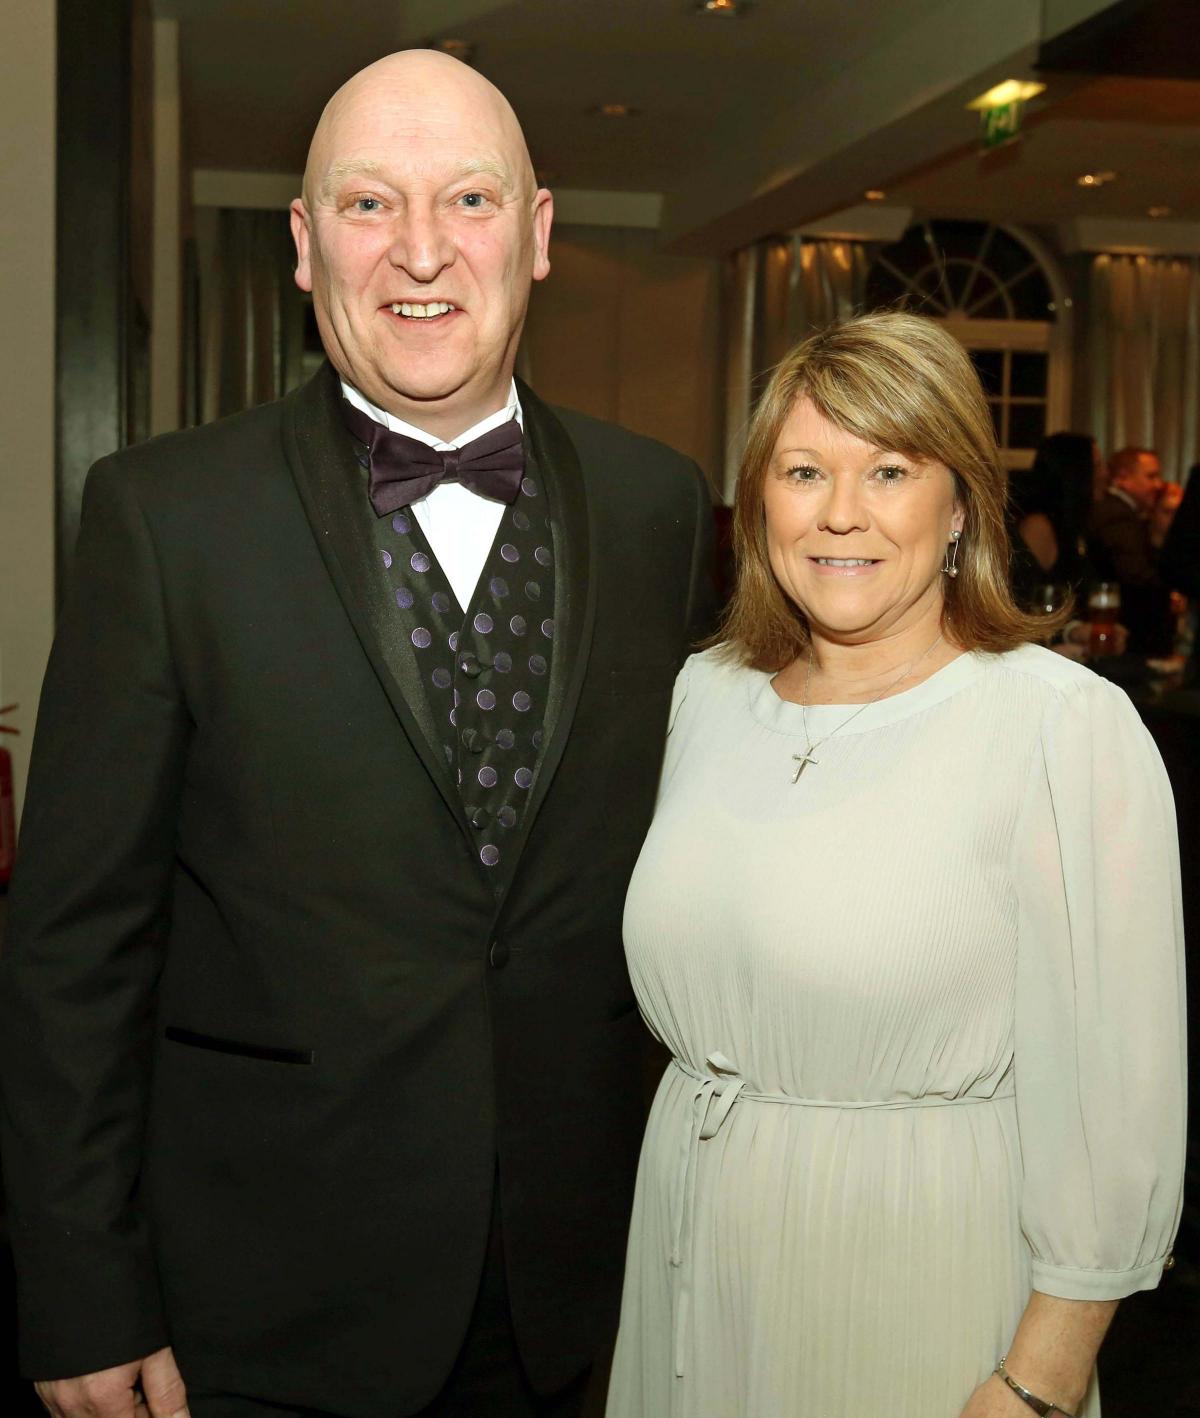 The Masonic Ladies Night at Scotch Corner Hotel.
David and Beverley Young.
Picture: Richard Doughty Photography